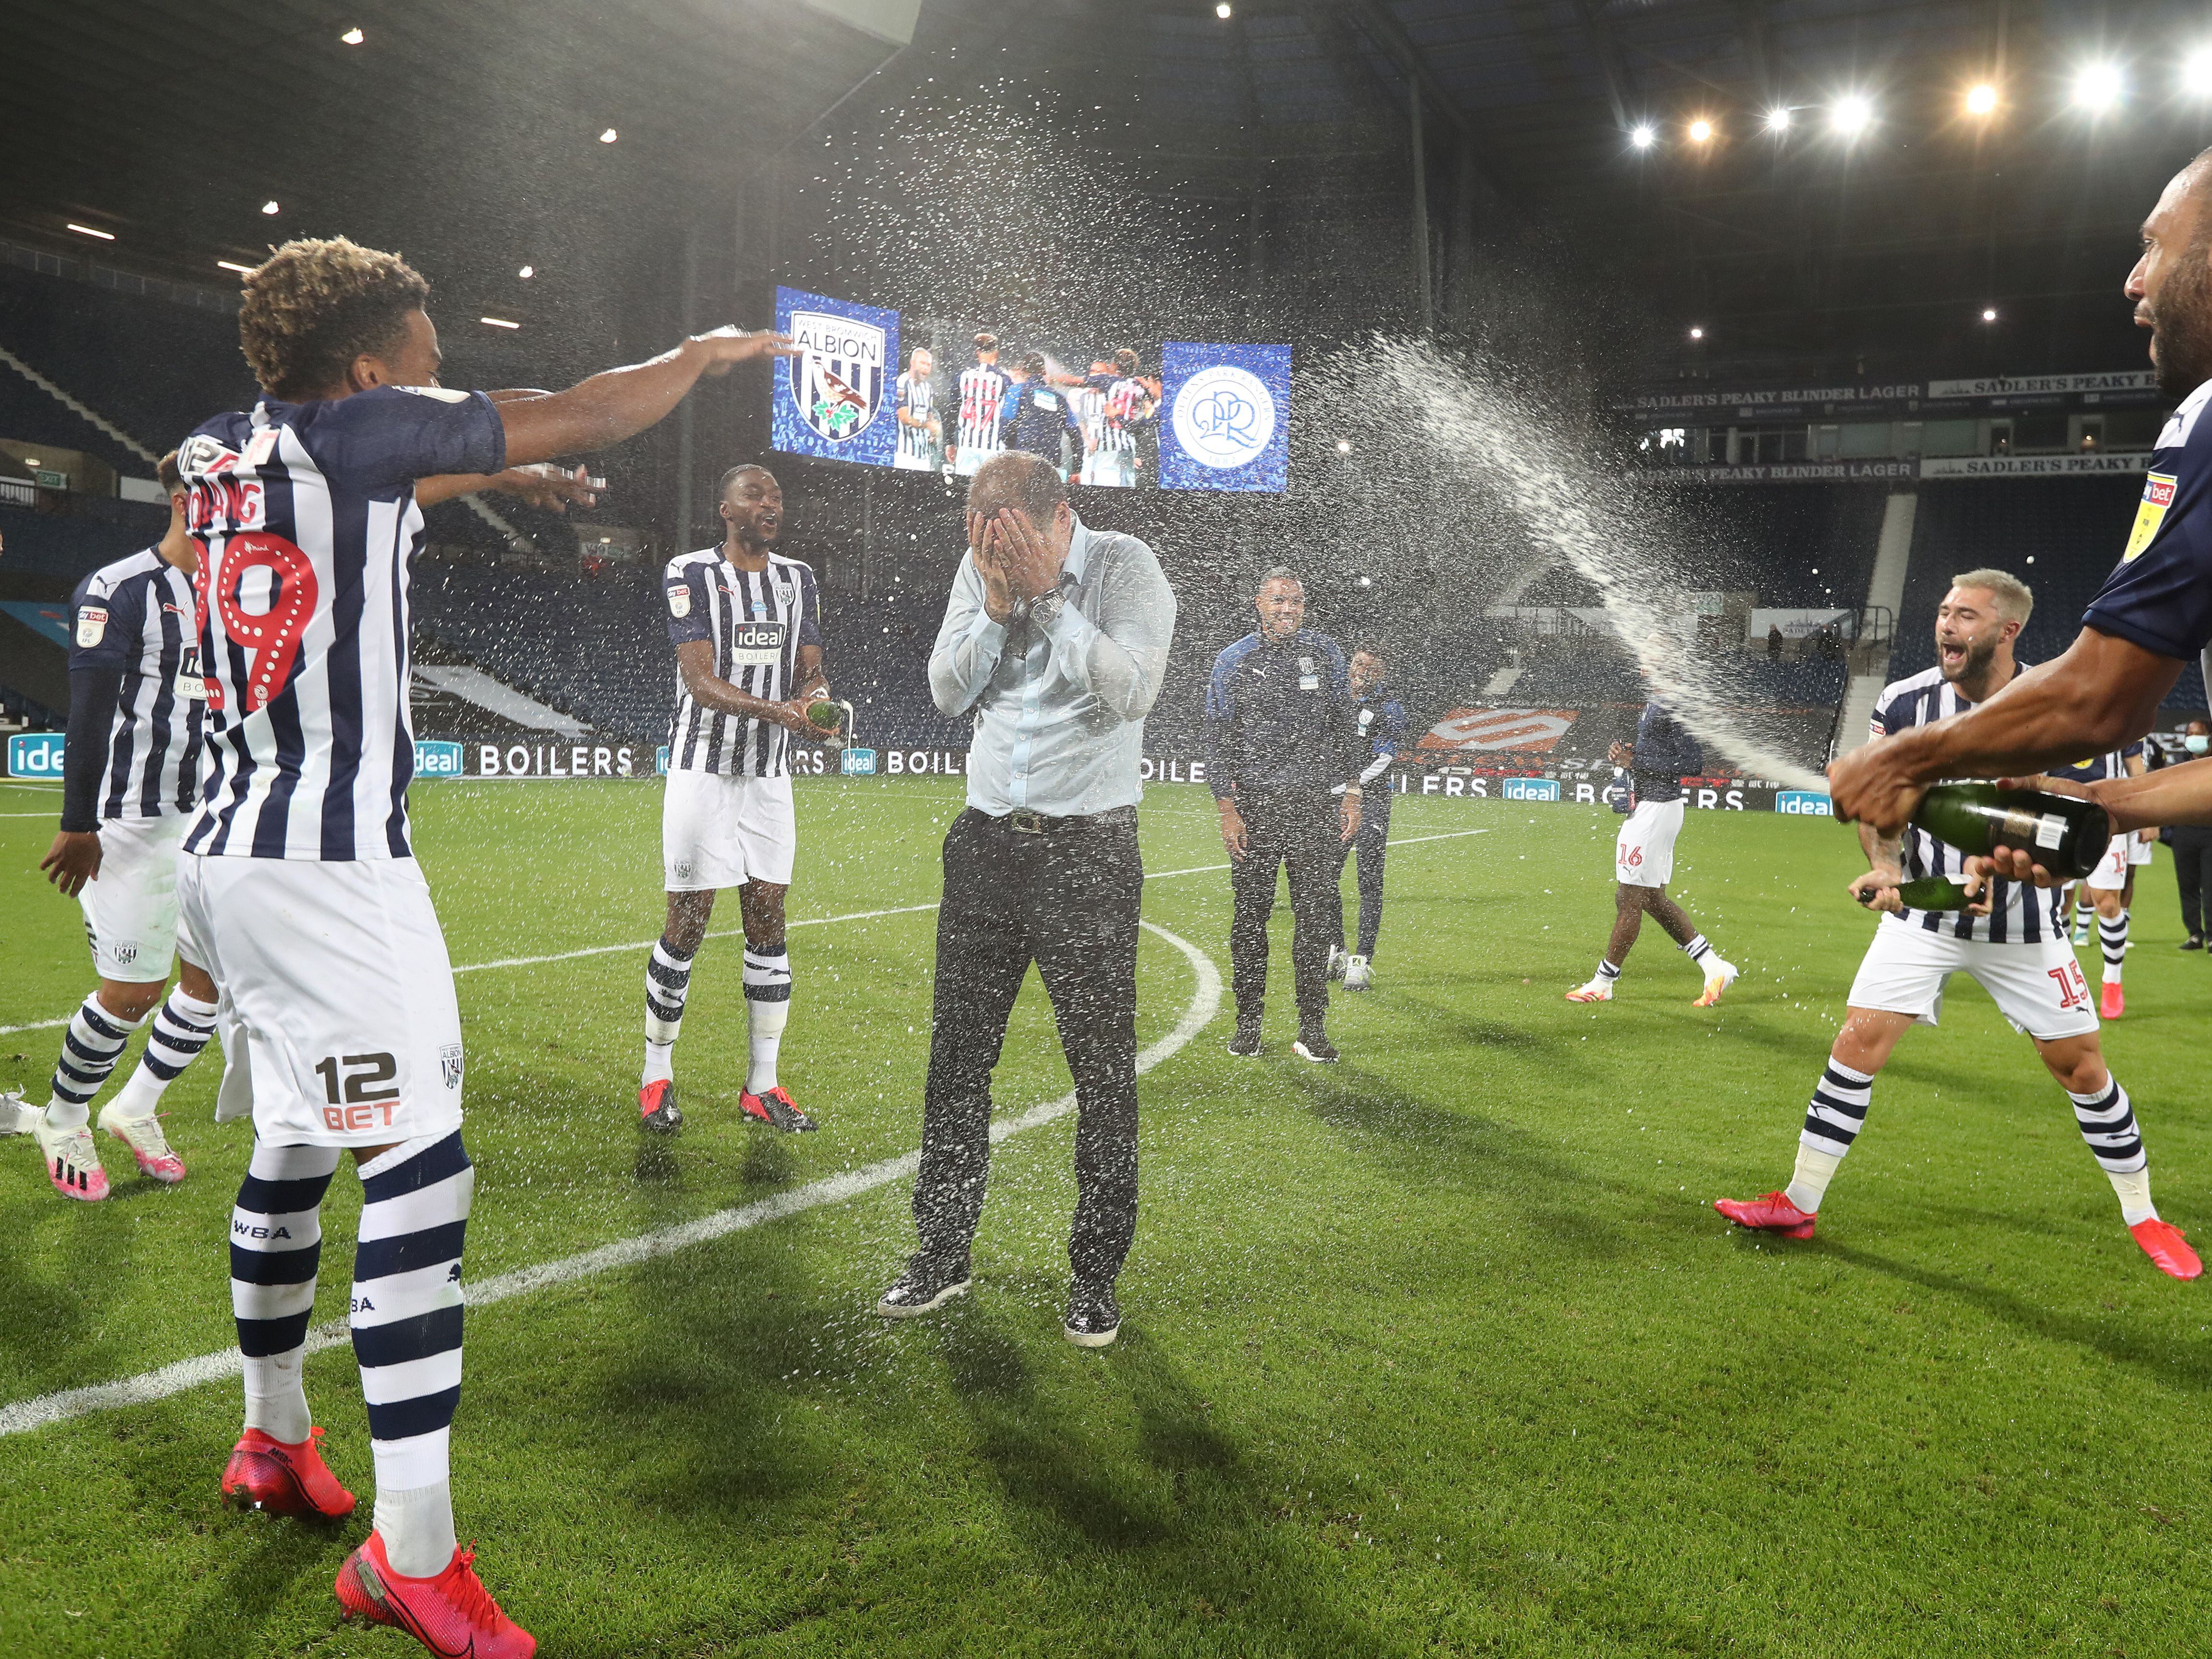 The promotion statistic that can lift spirits of West Brom fans